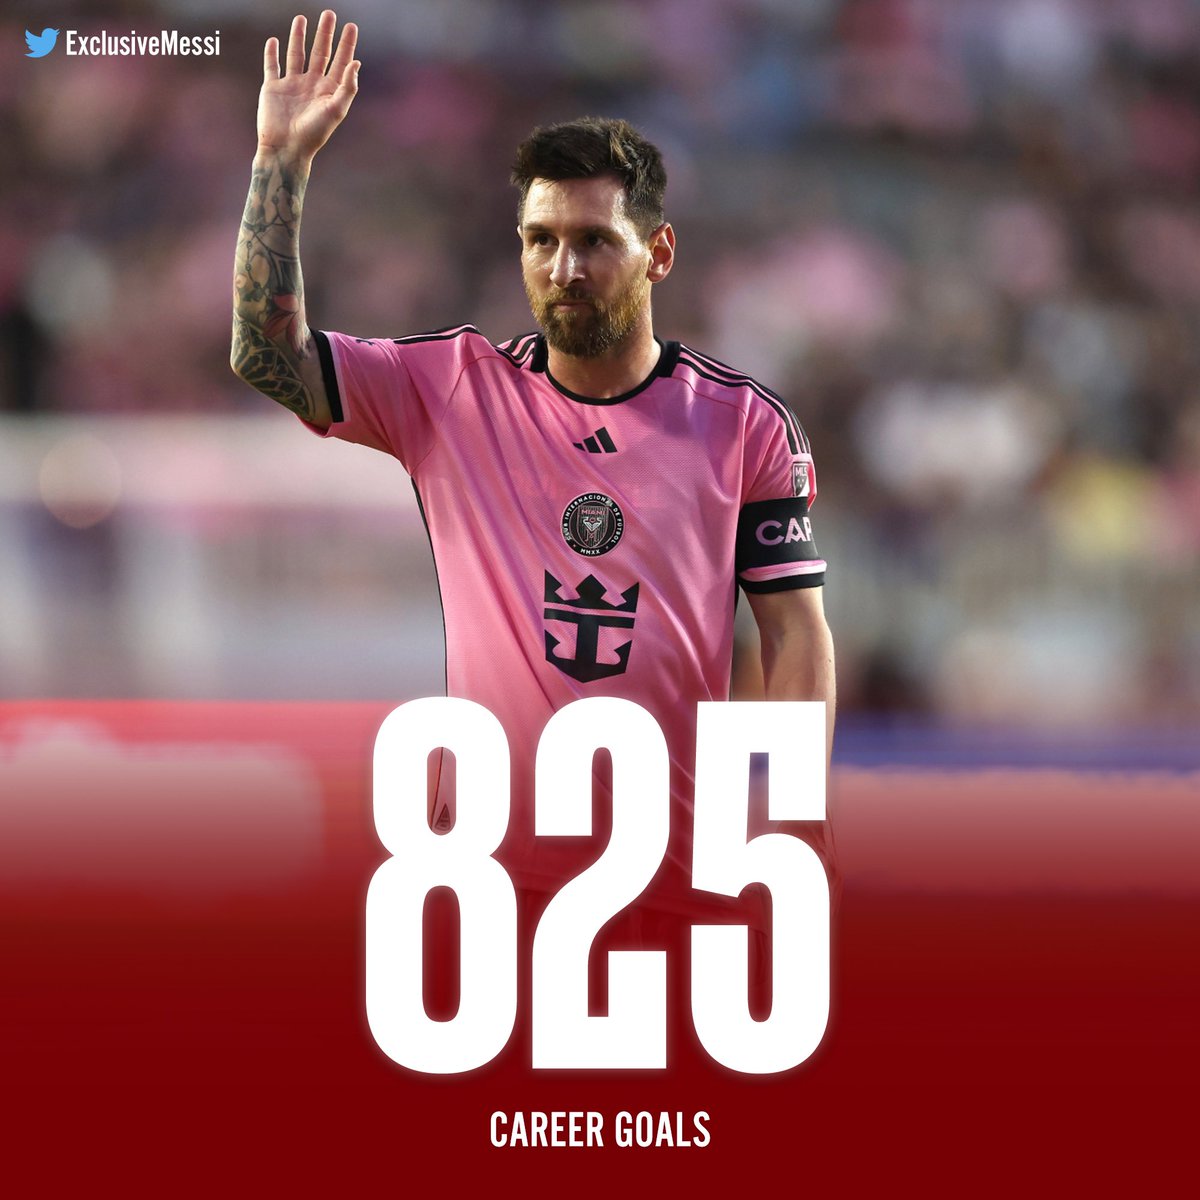 🚨 Lionel Messi has now scored 825 career goals!! He brings Miami back into the game! 🤯